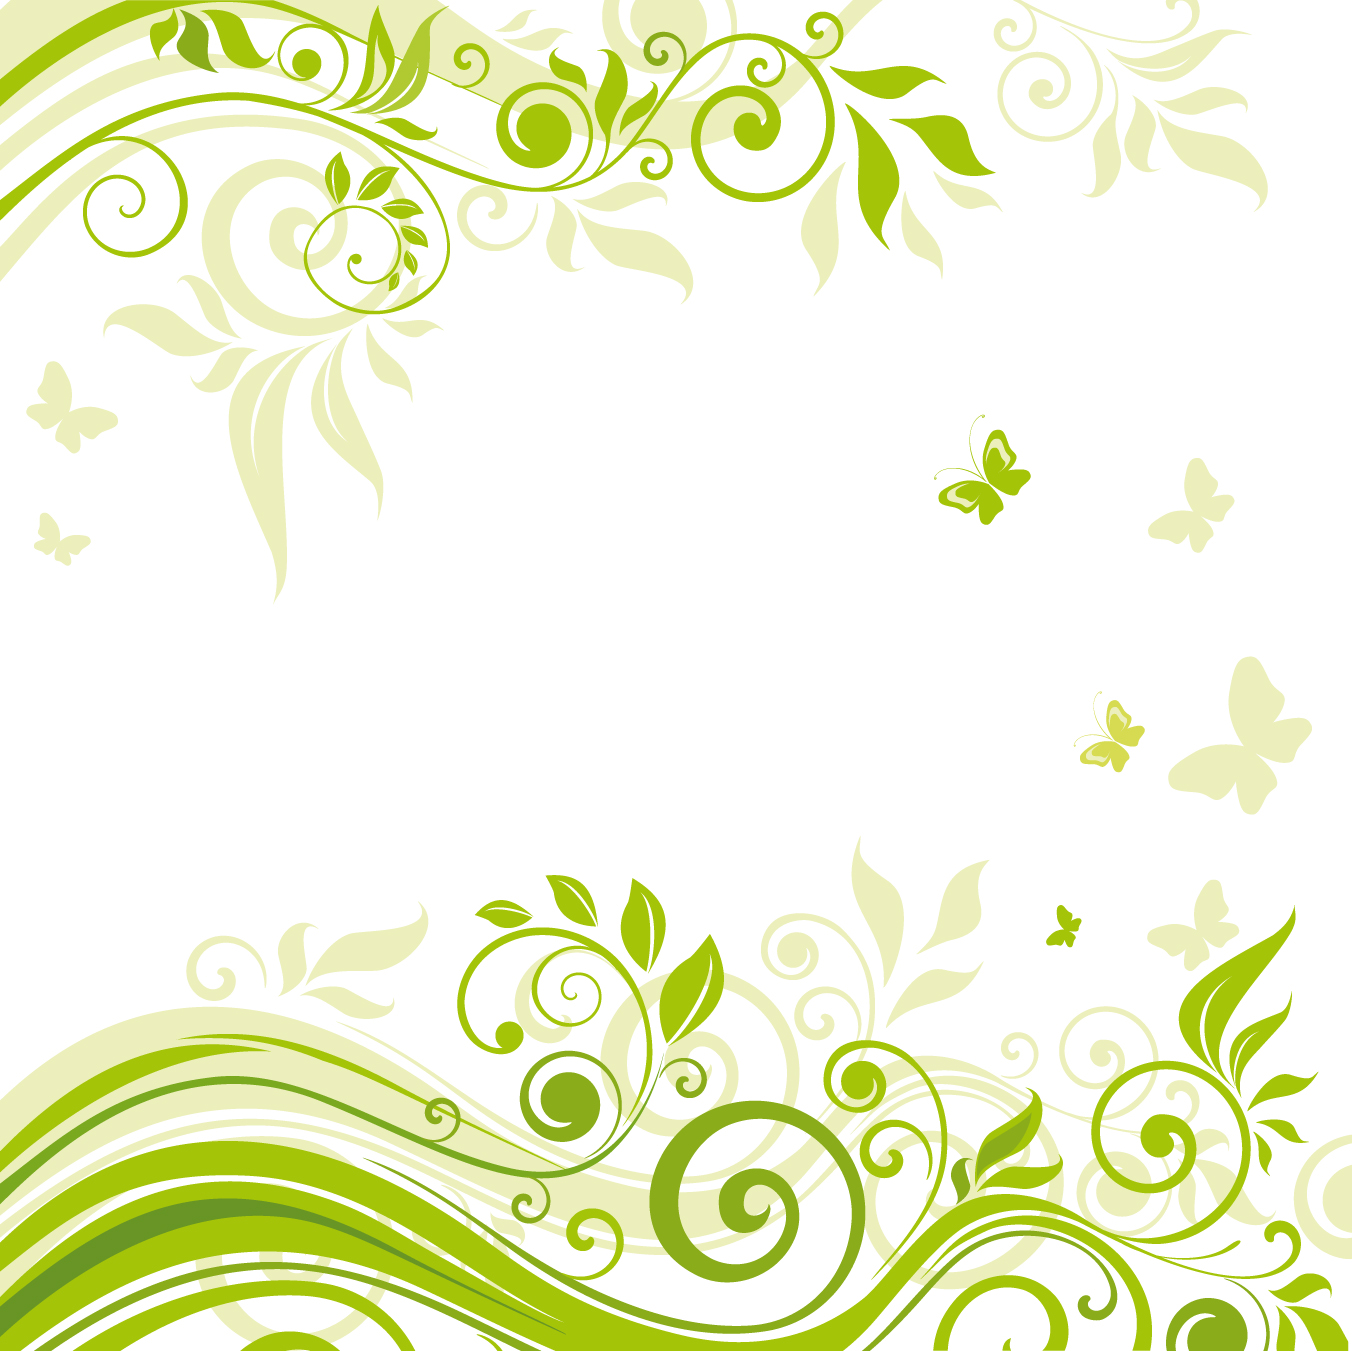 Beautiful flowers illustration background 02 vector Free Vector ...